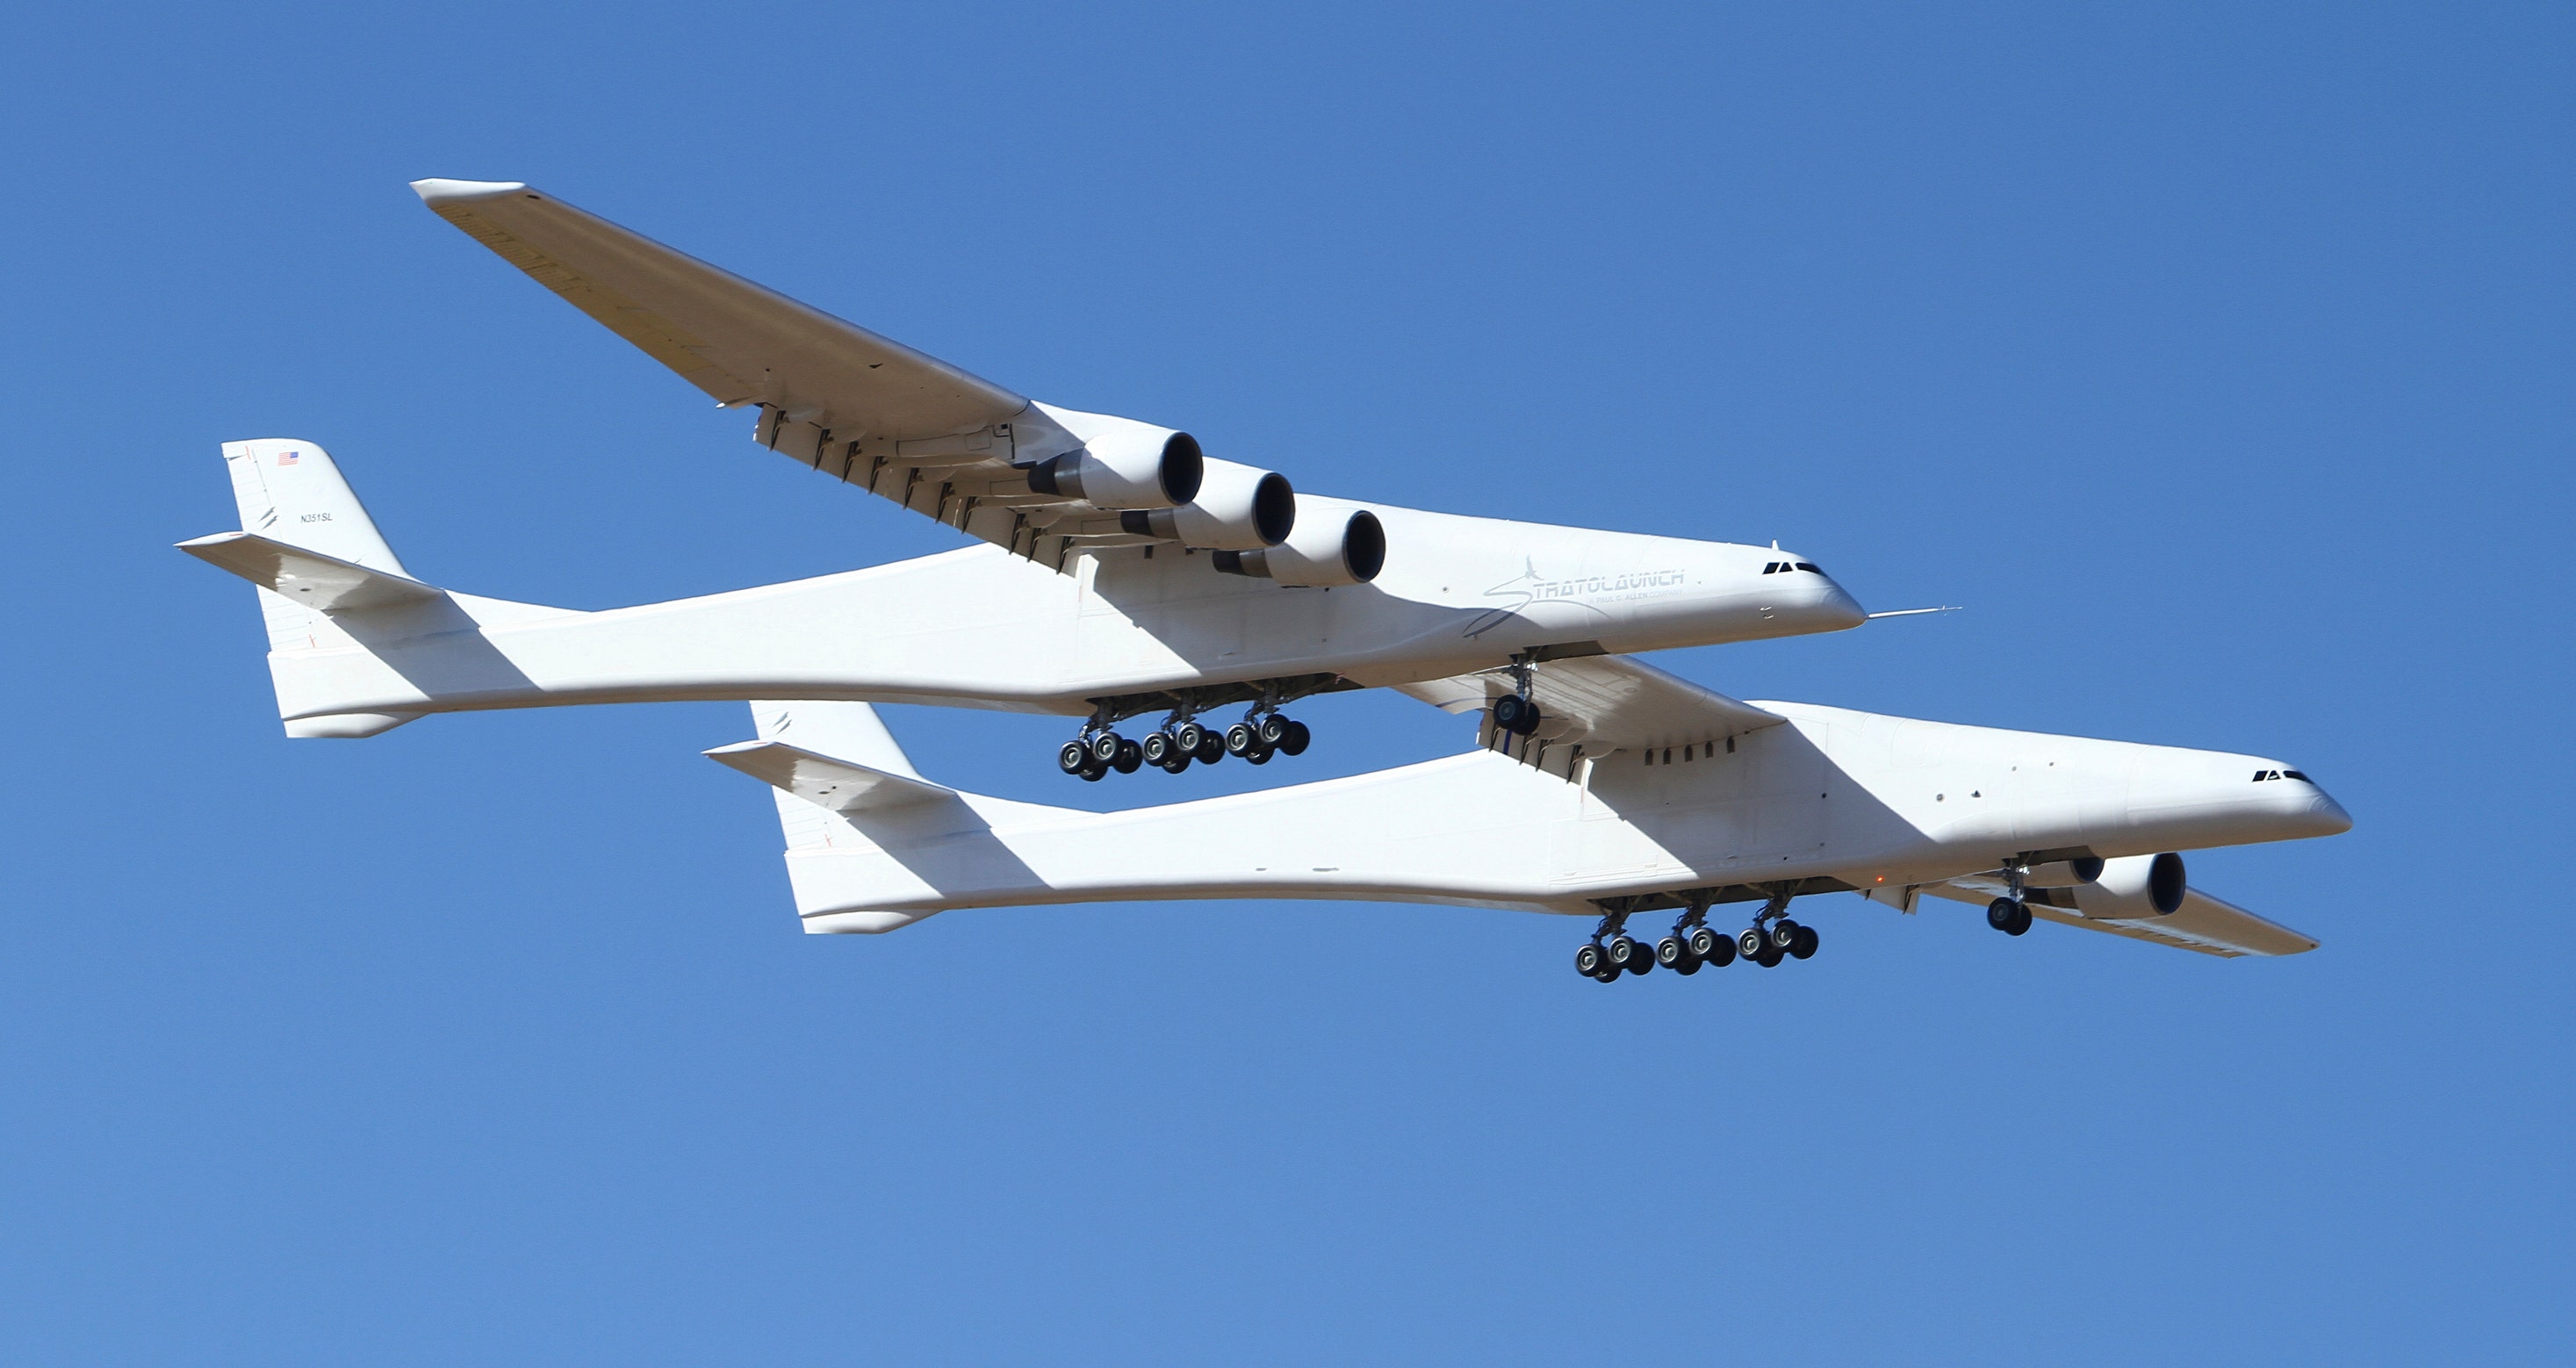 Stratolaunch, world's largest aircraft by wingspan, makes historic